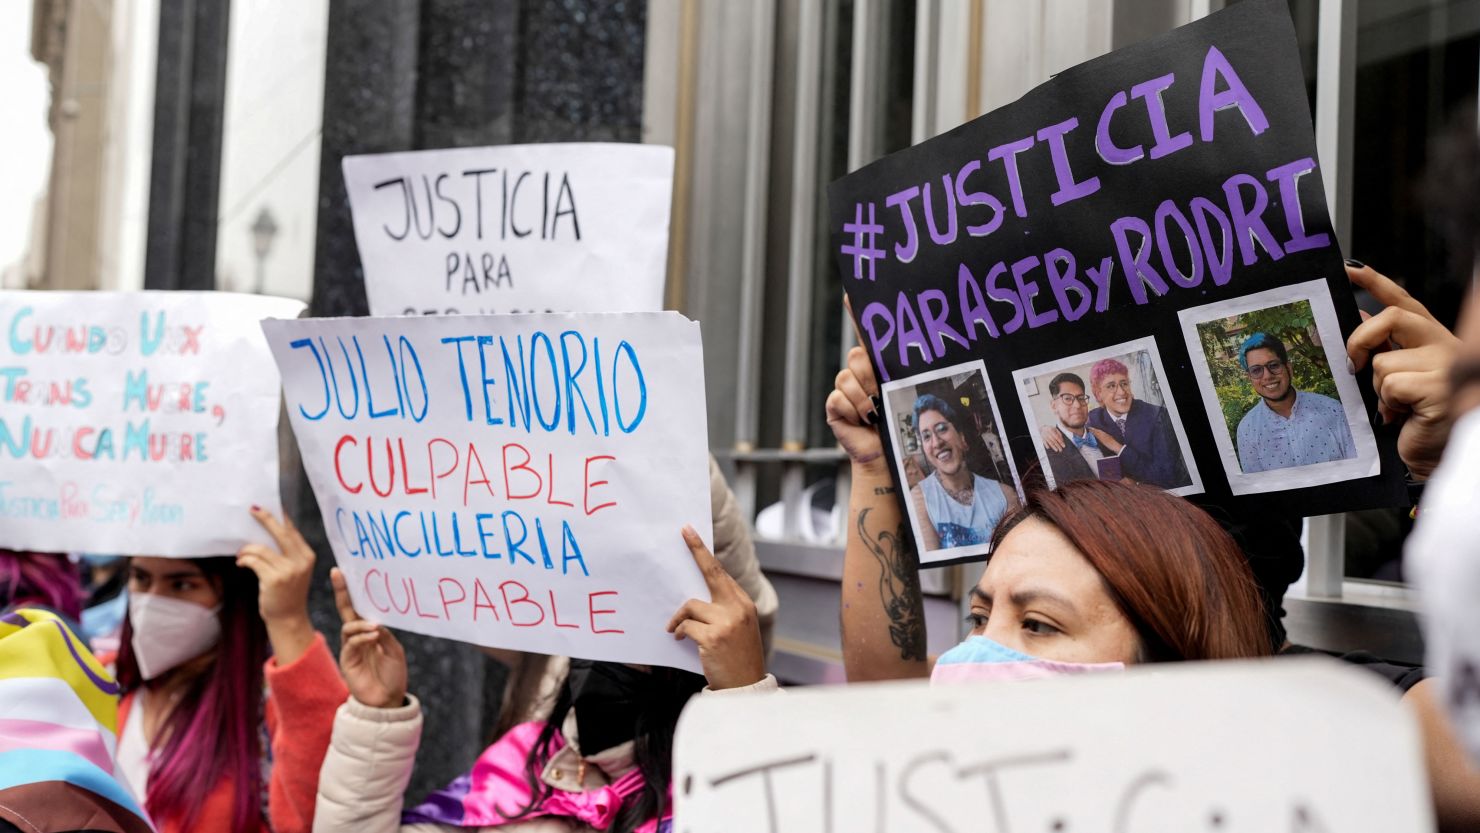 Demonstrators in Lima, Peru, hold signs demanding justice for Harvard graduate and transgender rights activist Rodrigo Ventosilla, who died on the island of Bali.